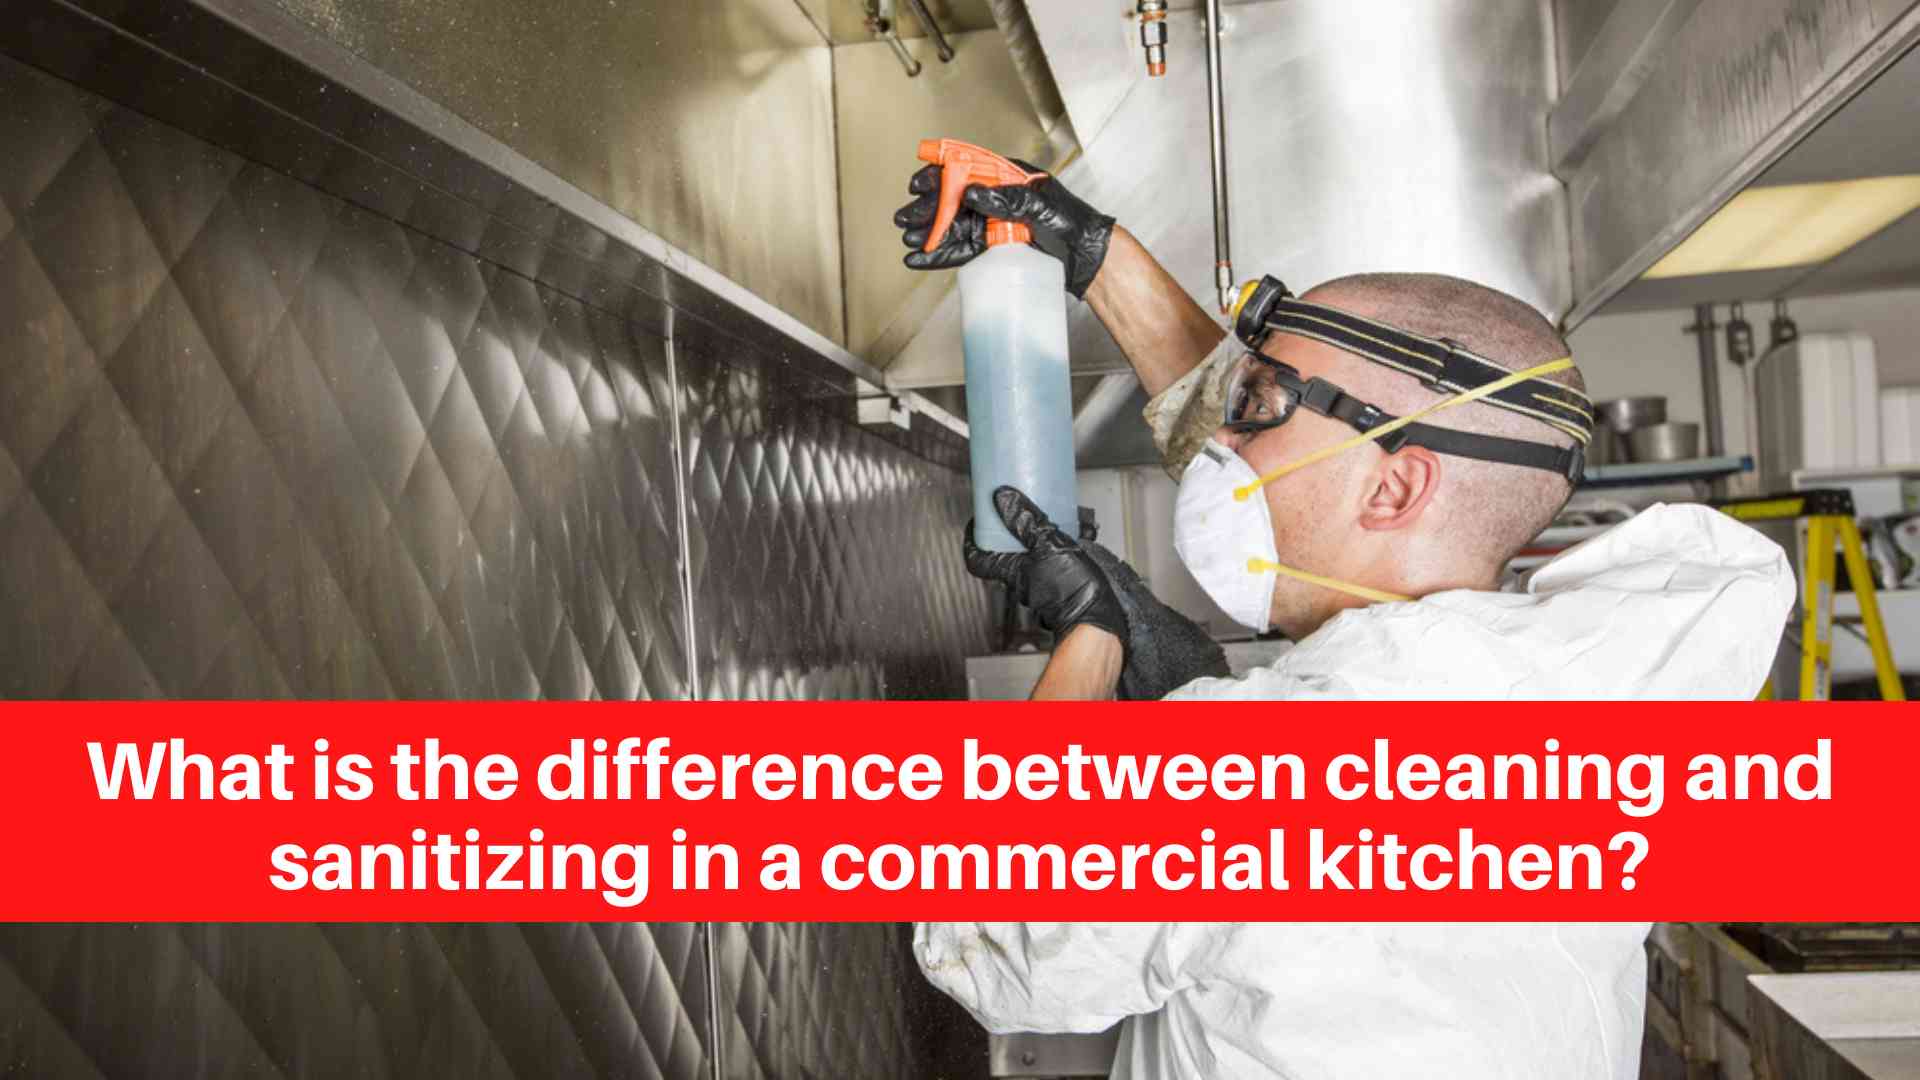 What is the difference between cleaning and sanitizing in a commercial kitchen